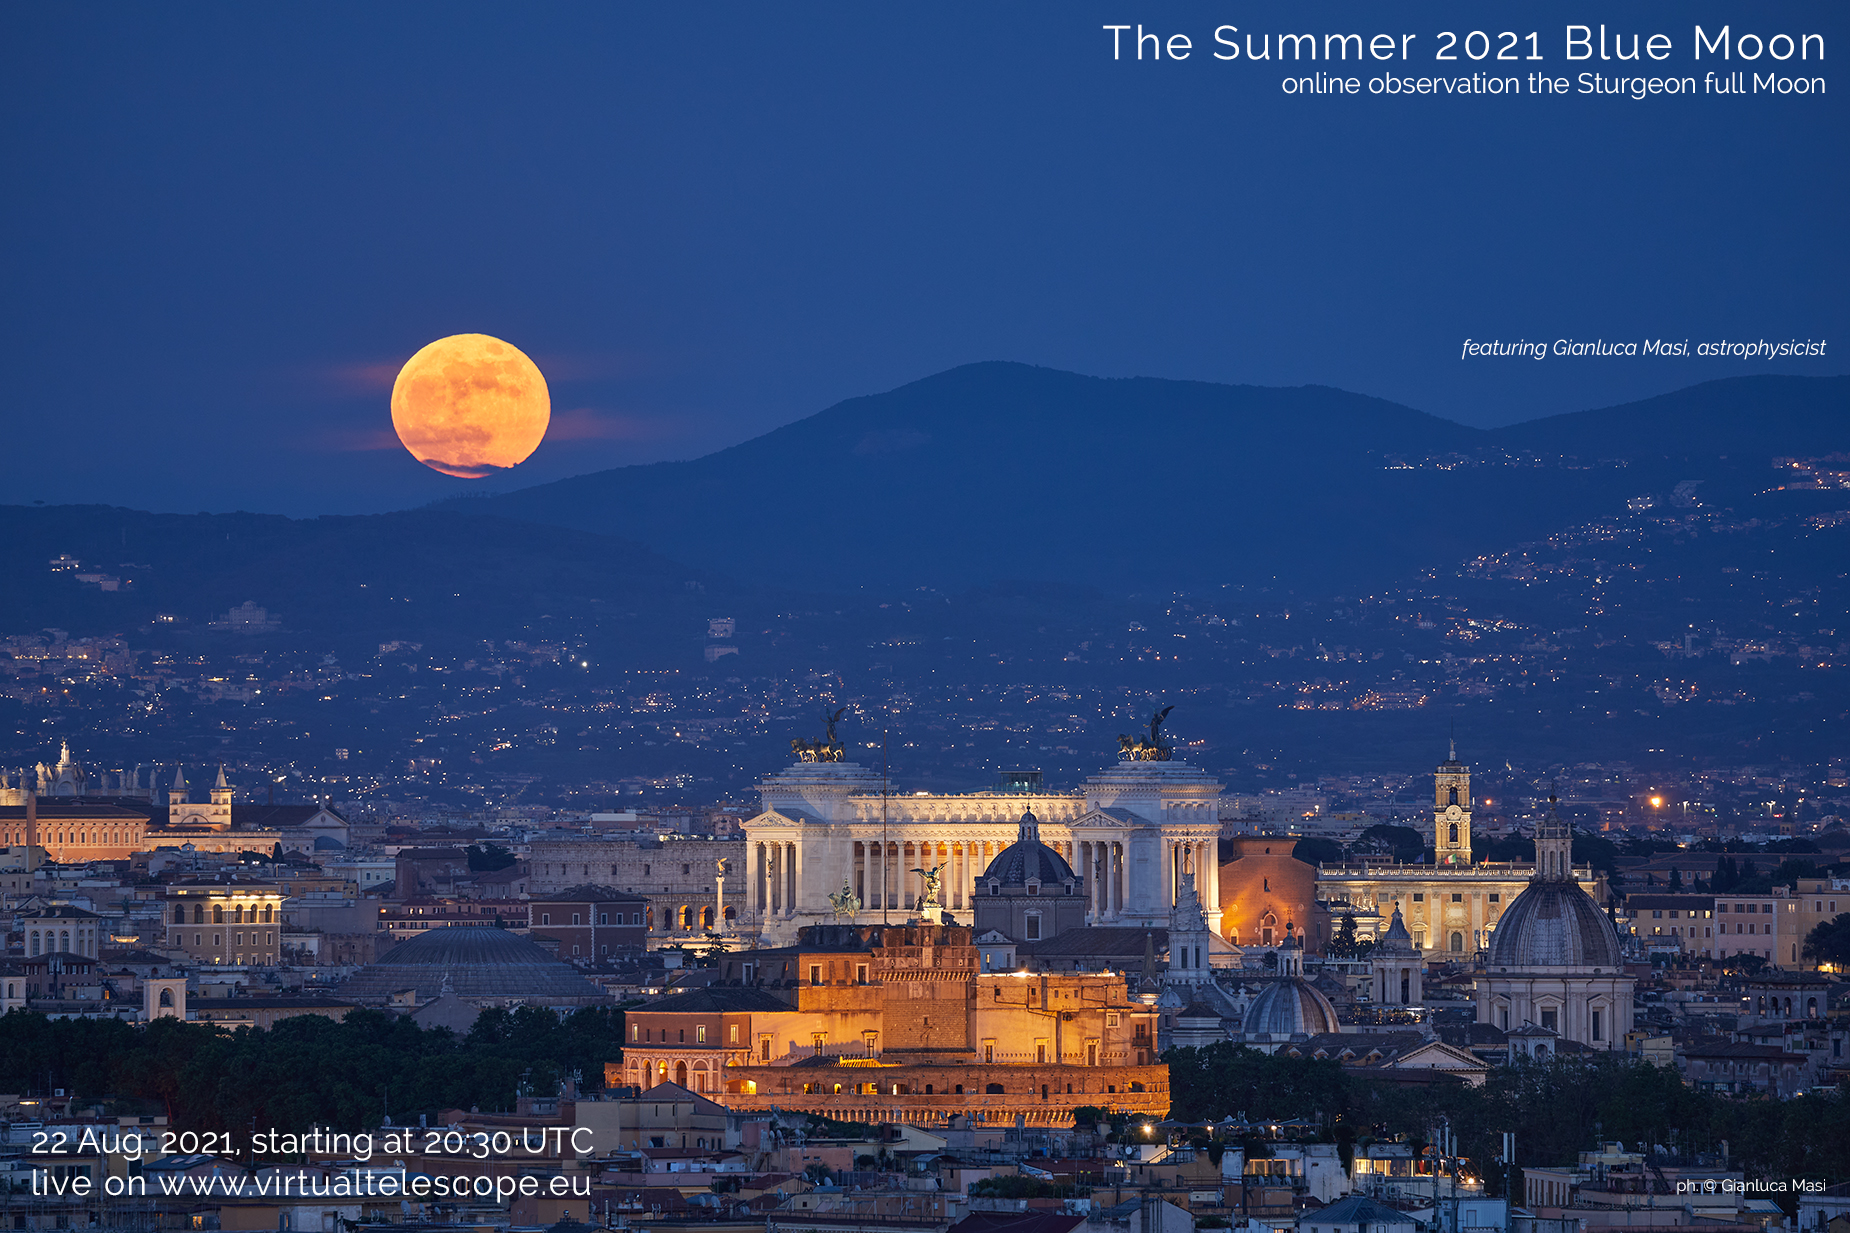 The Aug. 2021 Blue Moon: poster of the event